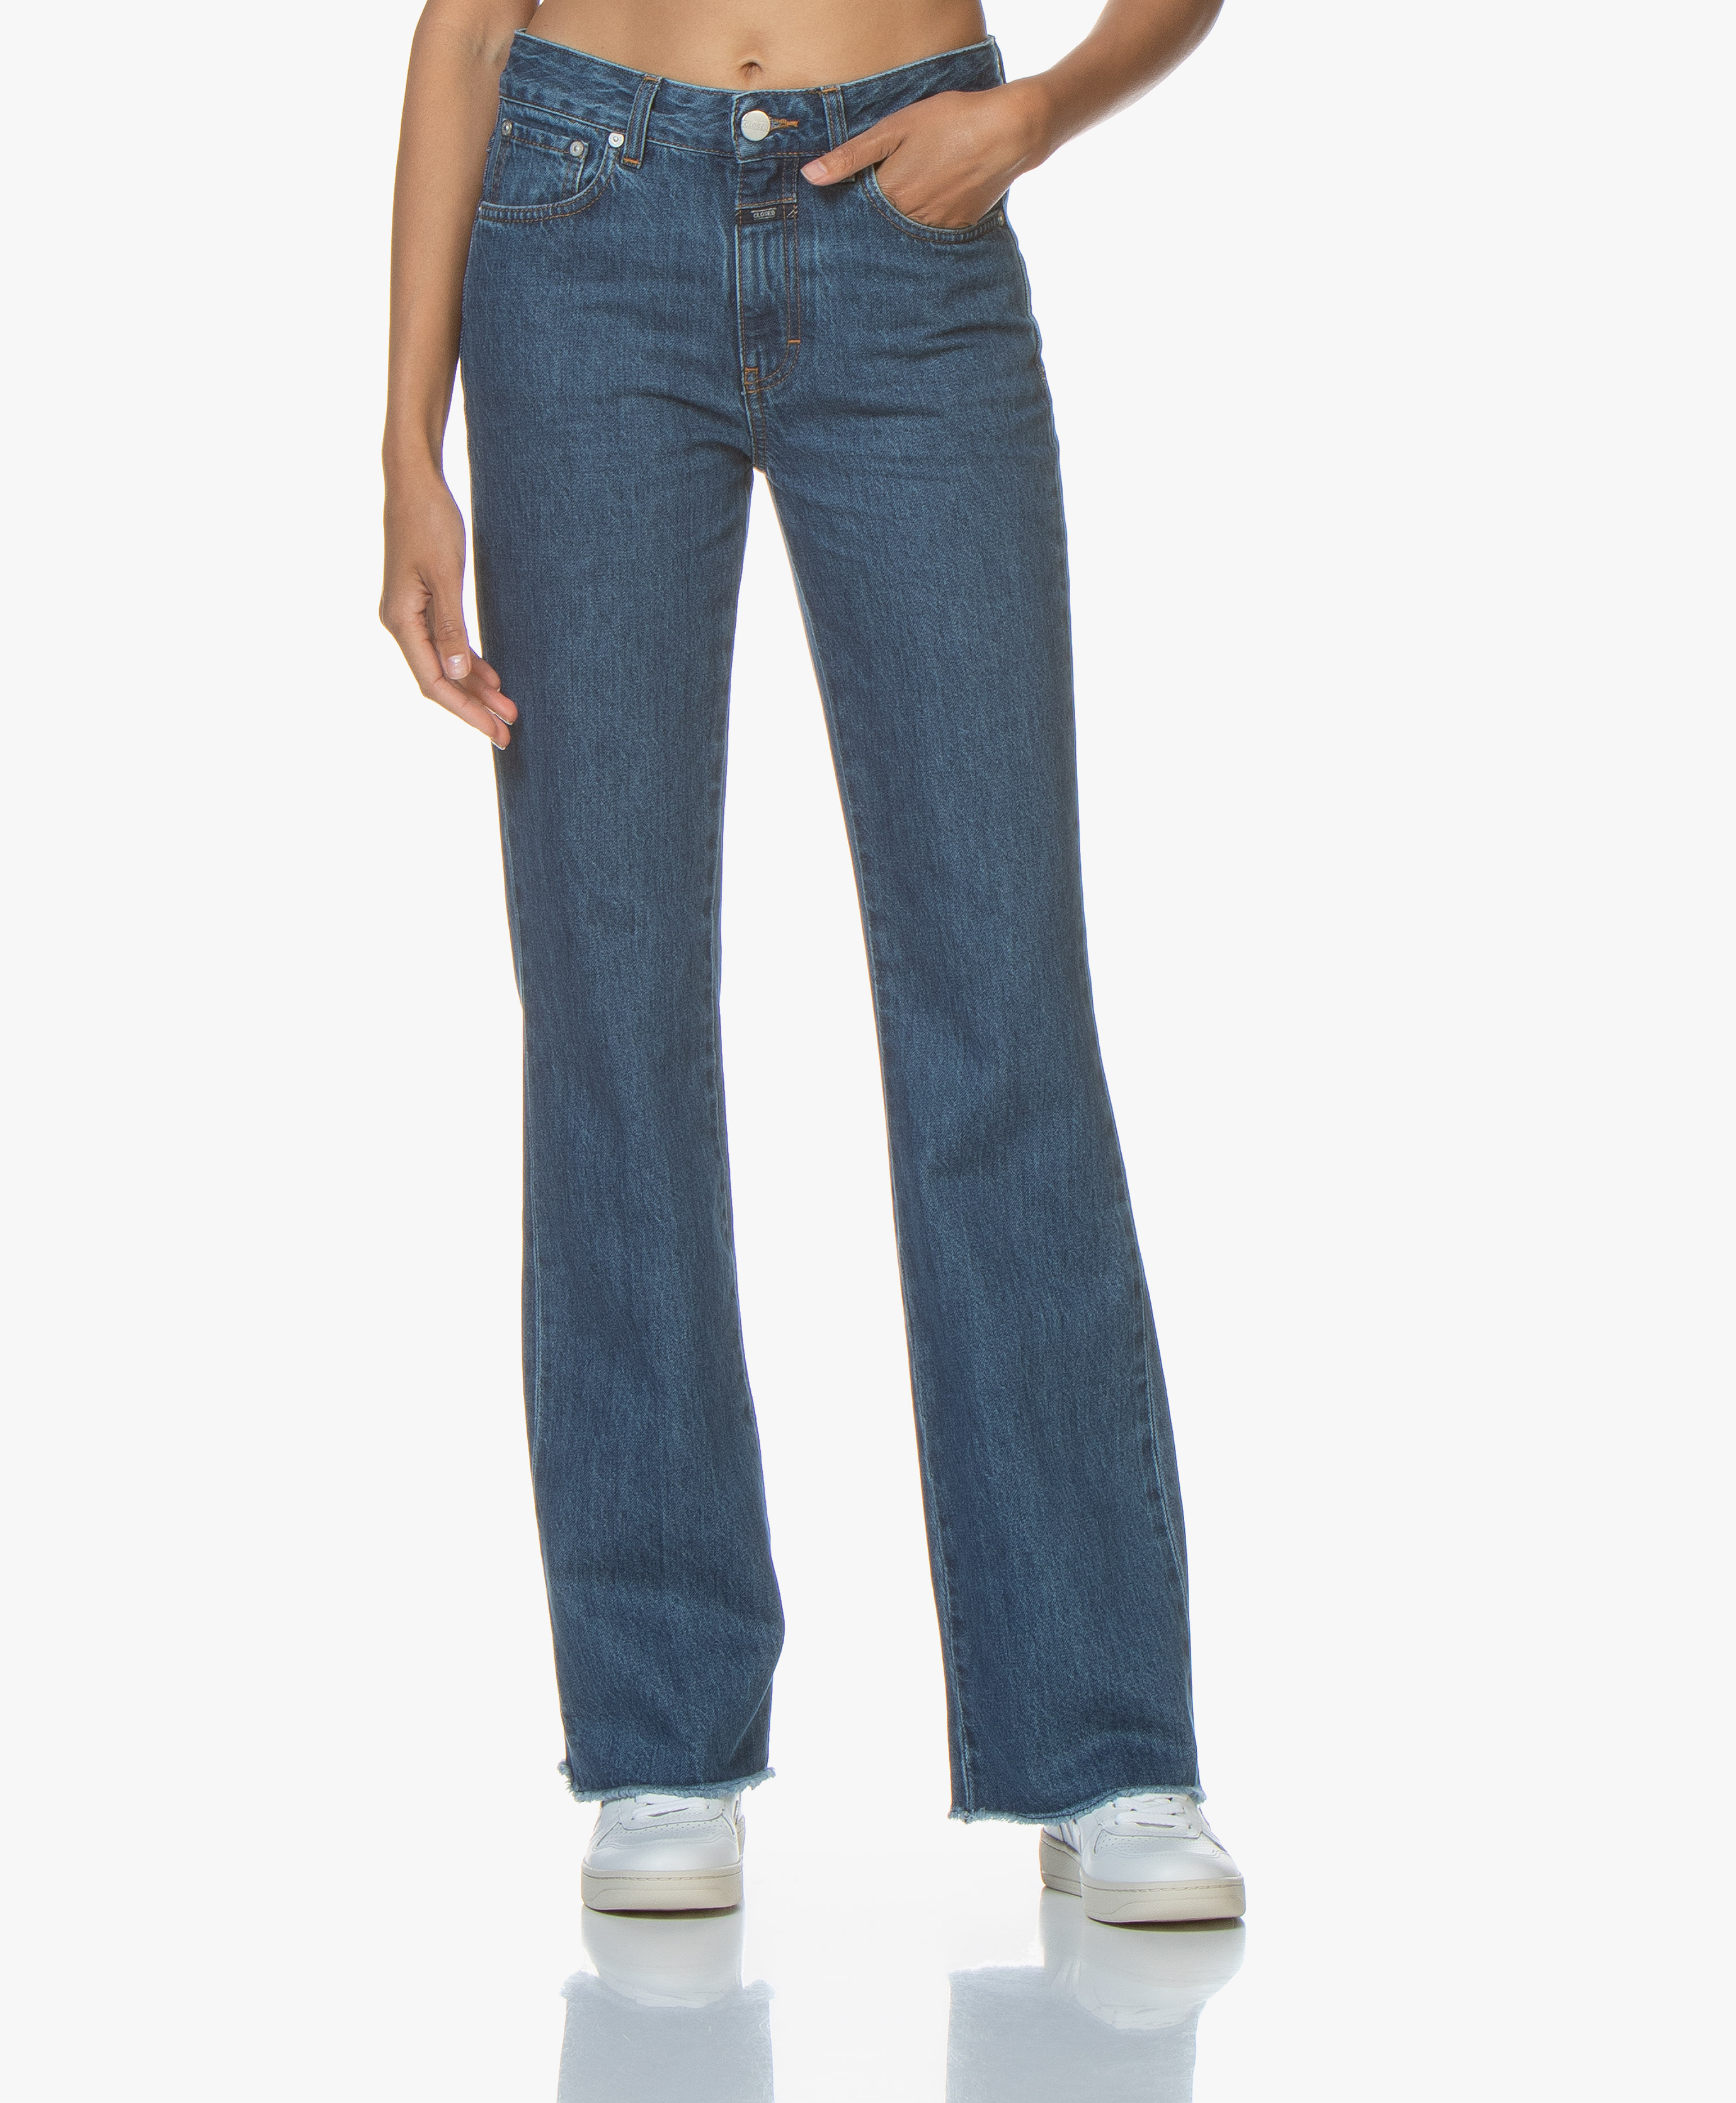 $25 jeans